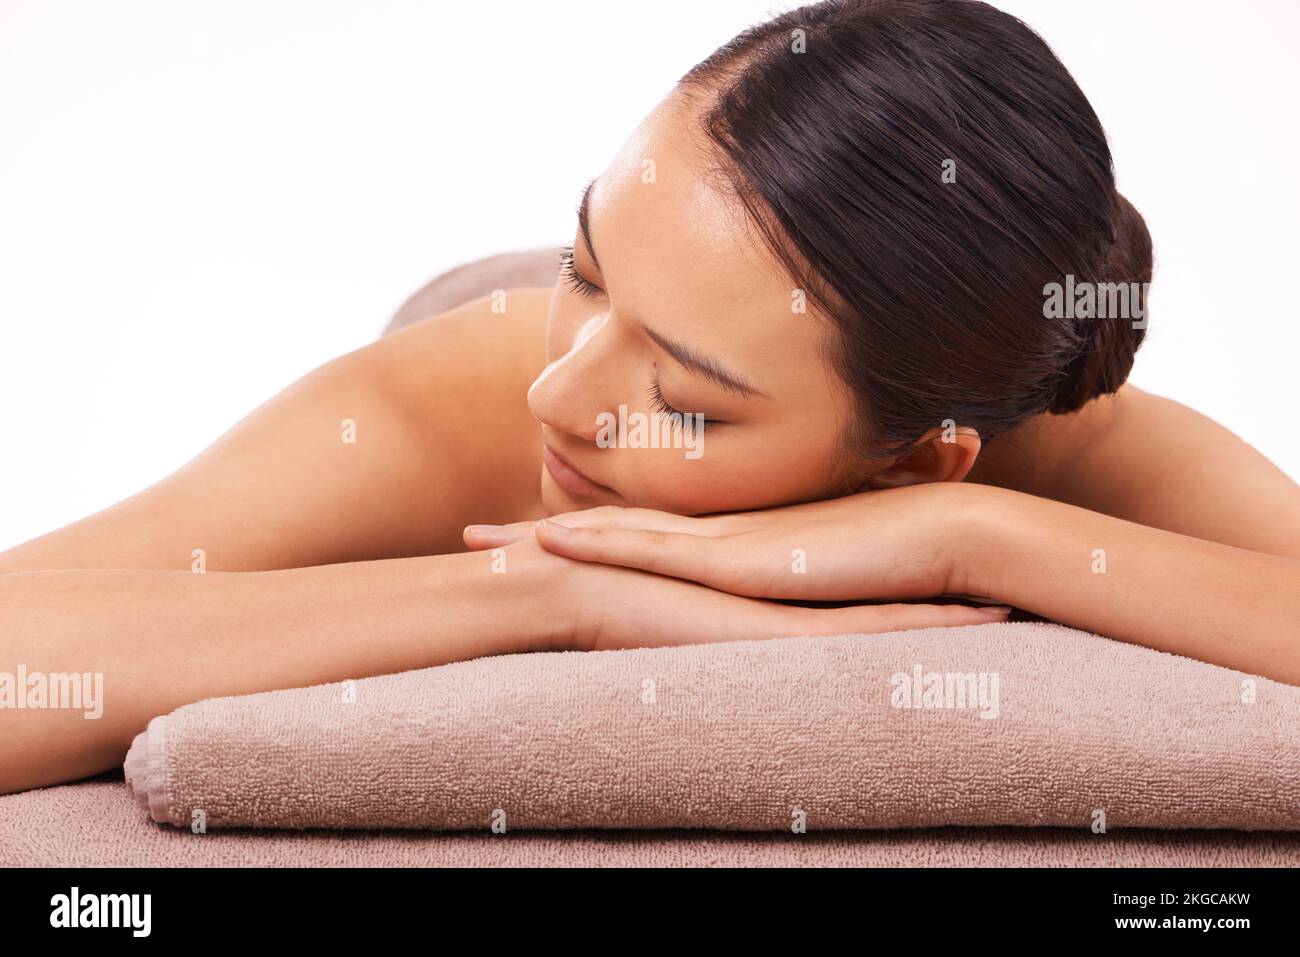 Take a day just for yourself. A beautiful young woman relaxing on a massage table before her massage. Stock Photo